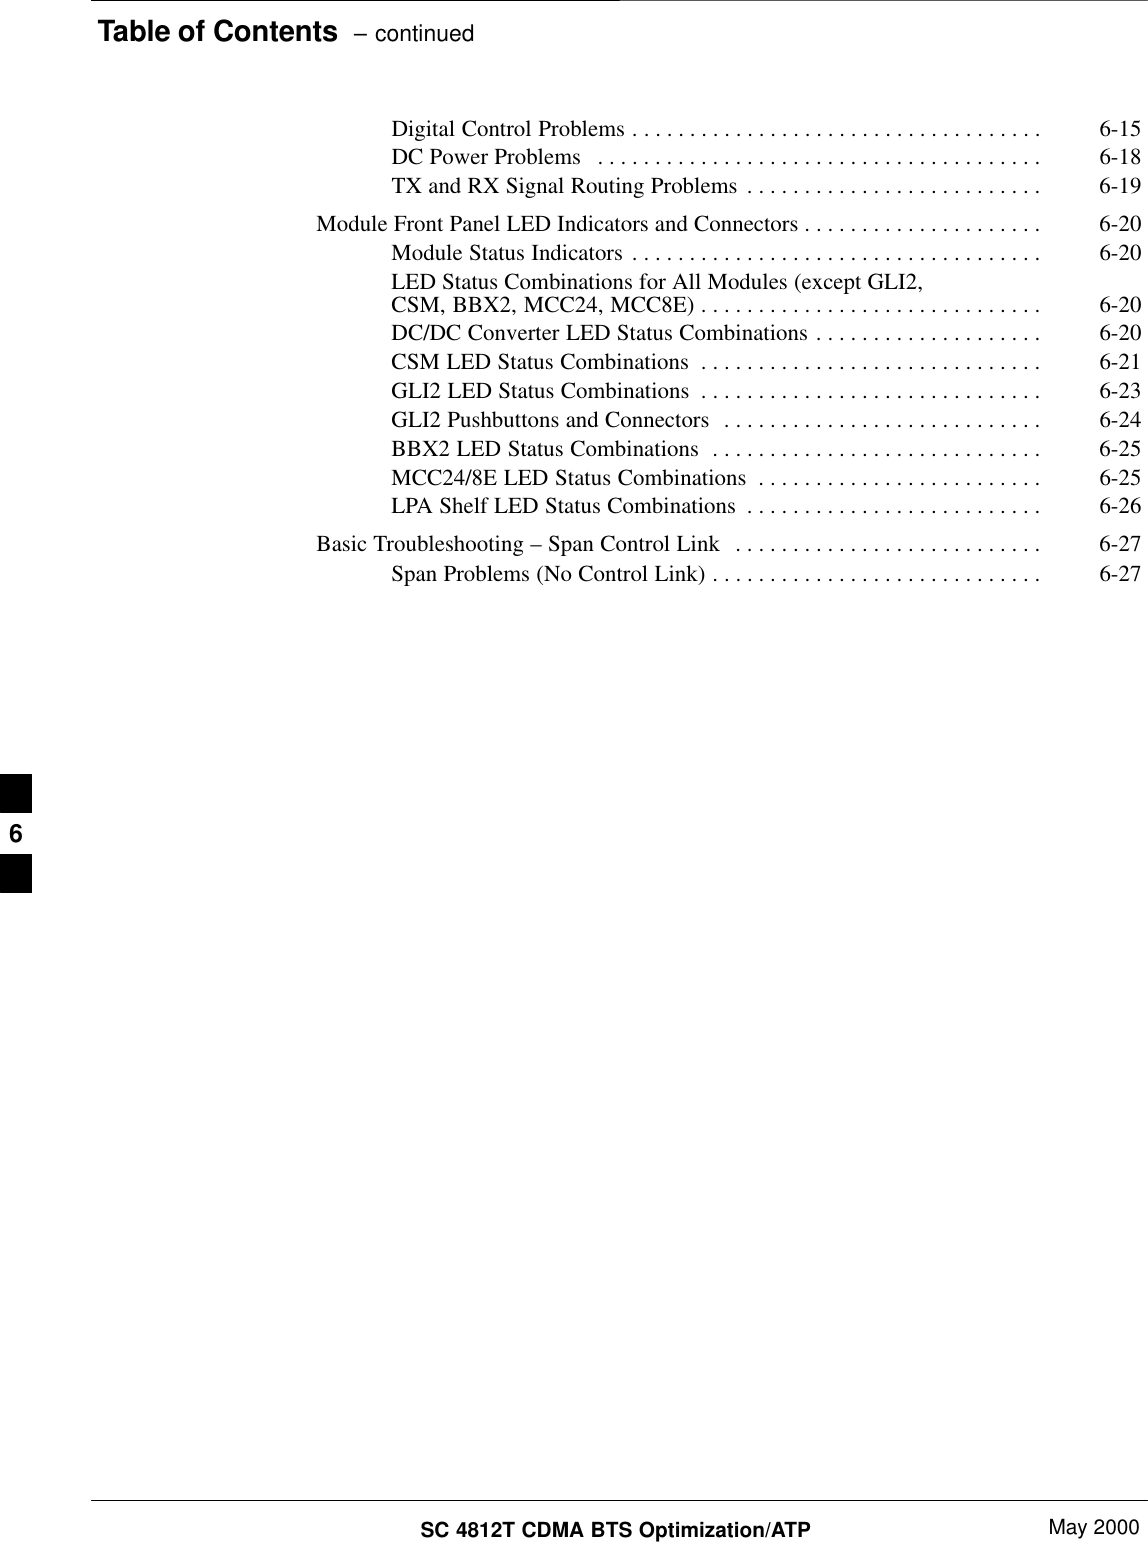 Table of Contents  – continuedSC 4812T CDMA BTS Optimization/ATP May 2000Digital Control Problems 6-15. . . . . . . . . . . . . . . . . . . . . . . . . . . . . . . . . . . . DC Power Problems 6-18. . . . . . . . . . . . . . . . . . . . . . . . . . . . . . . . . . . . . . . TX and RX Signal Routing Problems 6-19. . . . . . . . . . . . . . . . . . . . . . . . . . Module Front Panel LED Indicators and Connectors 6-20. . . . . . . . . . . . . . . . . . . . . Module Status Indicators 6-20. . . . . . . . . . . . . . . . . . . . . . . . . . . . . . . . . . . . LED Status Combinations for All Modules (except GLI2,CSM, BBX2, MCC24, MCC8E) 6-20. . . . . . . . . . . . . . . . . . . . . . . . . . . . . . DC/DC Converter LED Status Combinations 6-20. . . . . . . . . . . . . . . . . . . . CSM LED Status Combinations 6-21. . . . . . . . . . . . . . . . . . . . . . . . . . . . . . GLI2 LED Status Combinations 6-23. . . . . . . . . . . . . . . . . . . . . . . . . . . . . . GLI2 Pushbuttons and Connectors 6-24. . . . . . . . . . . . . . . . . . . . . . . . . . . . BBX2 LED Status Combinations 6-25. . . . . . . . . . . . . . . . . . . . . . . . . . . . . MCC24/8E LED Status Combinations 6-25. . . . . . . . . . . . . . . . . . . . . . . . . LPA Shelf LED Status Combinations 6-26. . . . . . . . . . . . . . . . . . . . . . . . . . Basic Troubleshooting – Span Control Link 6-27. . . . . . . . . . . . . . . . . . . . . . . . . . . Span Problems (No Control Link) 6-27. . . . . . . . . . . . . . . . . . . . . . . . . . . . . 6